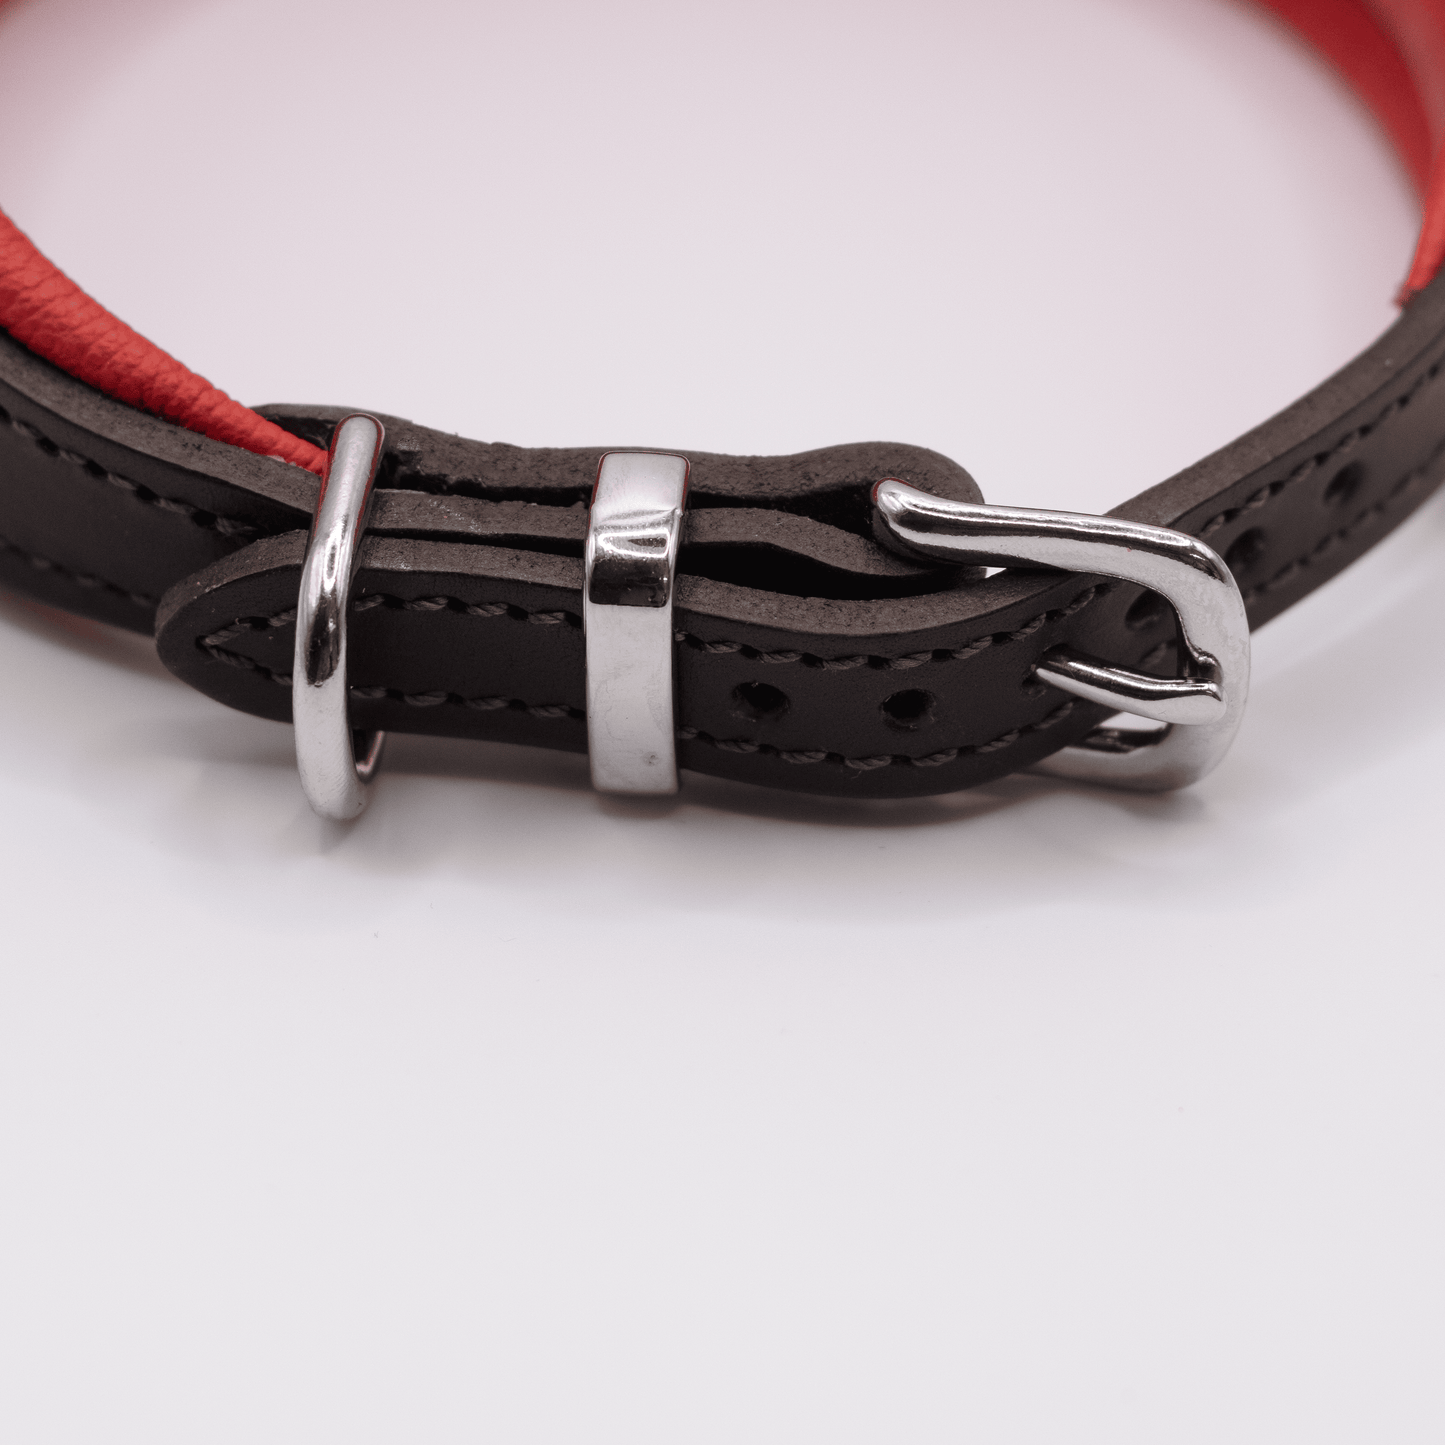 D&H Padded Leather Hound Collar Brown and Red